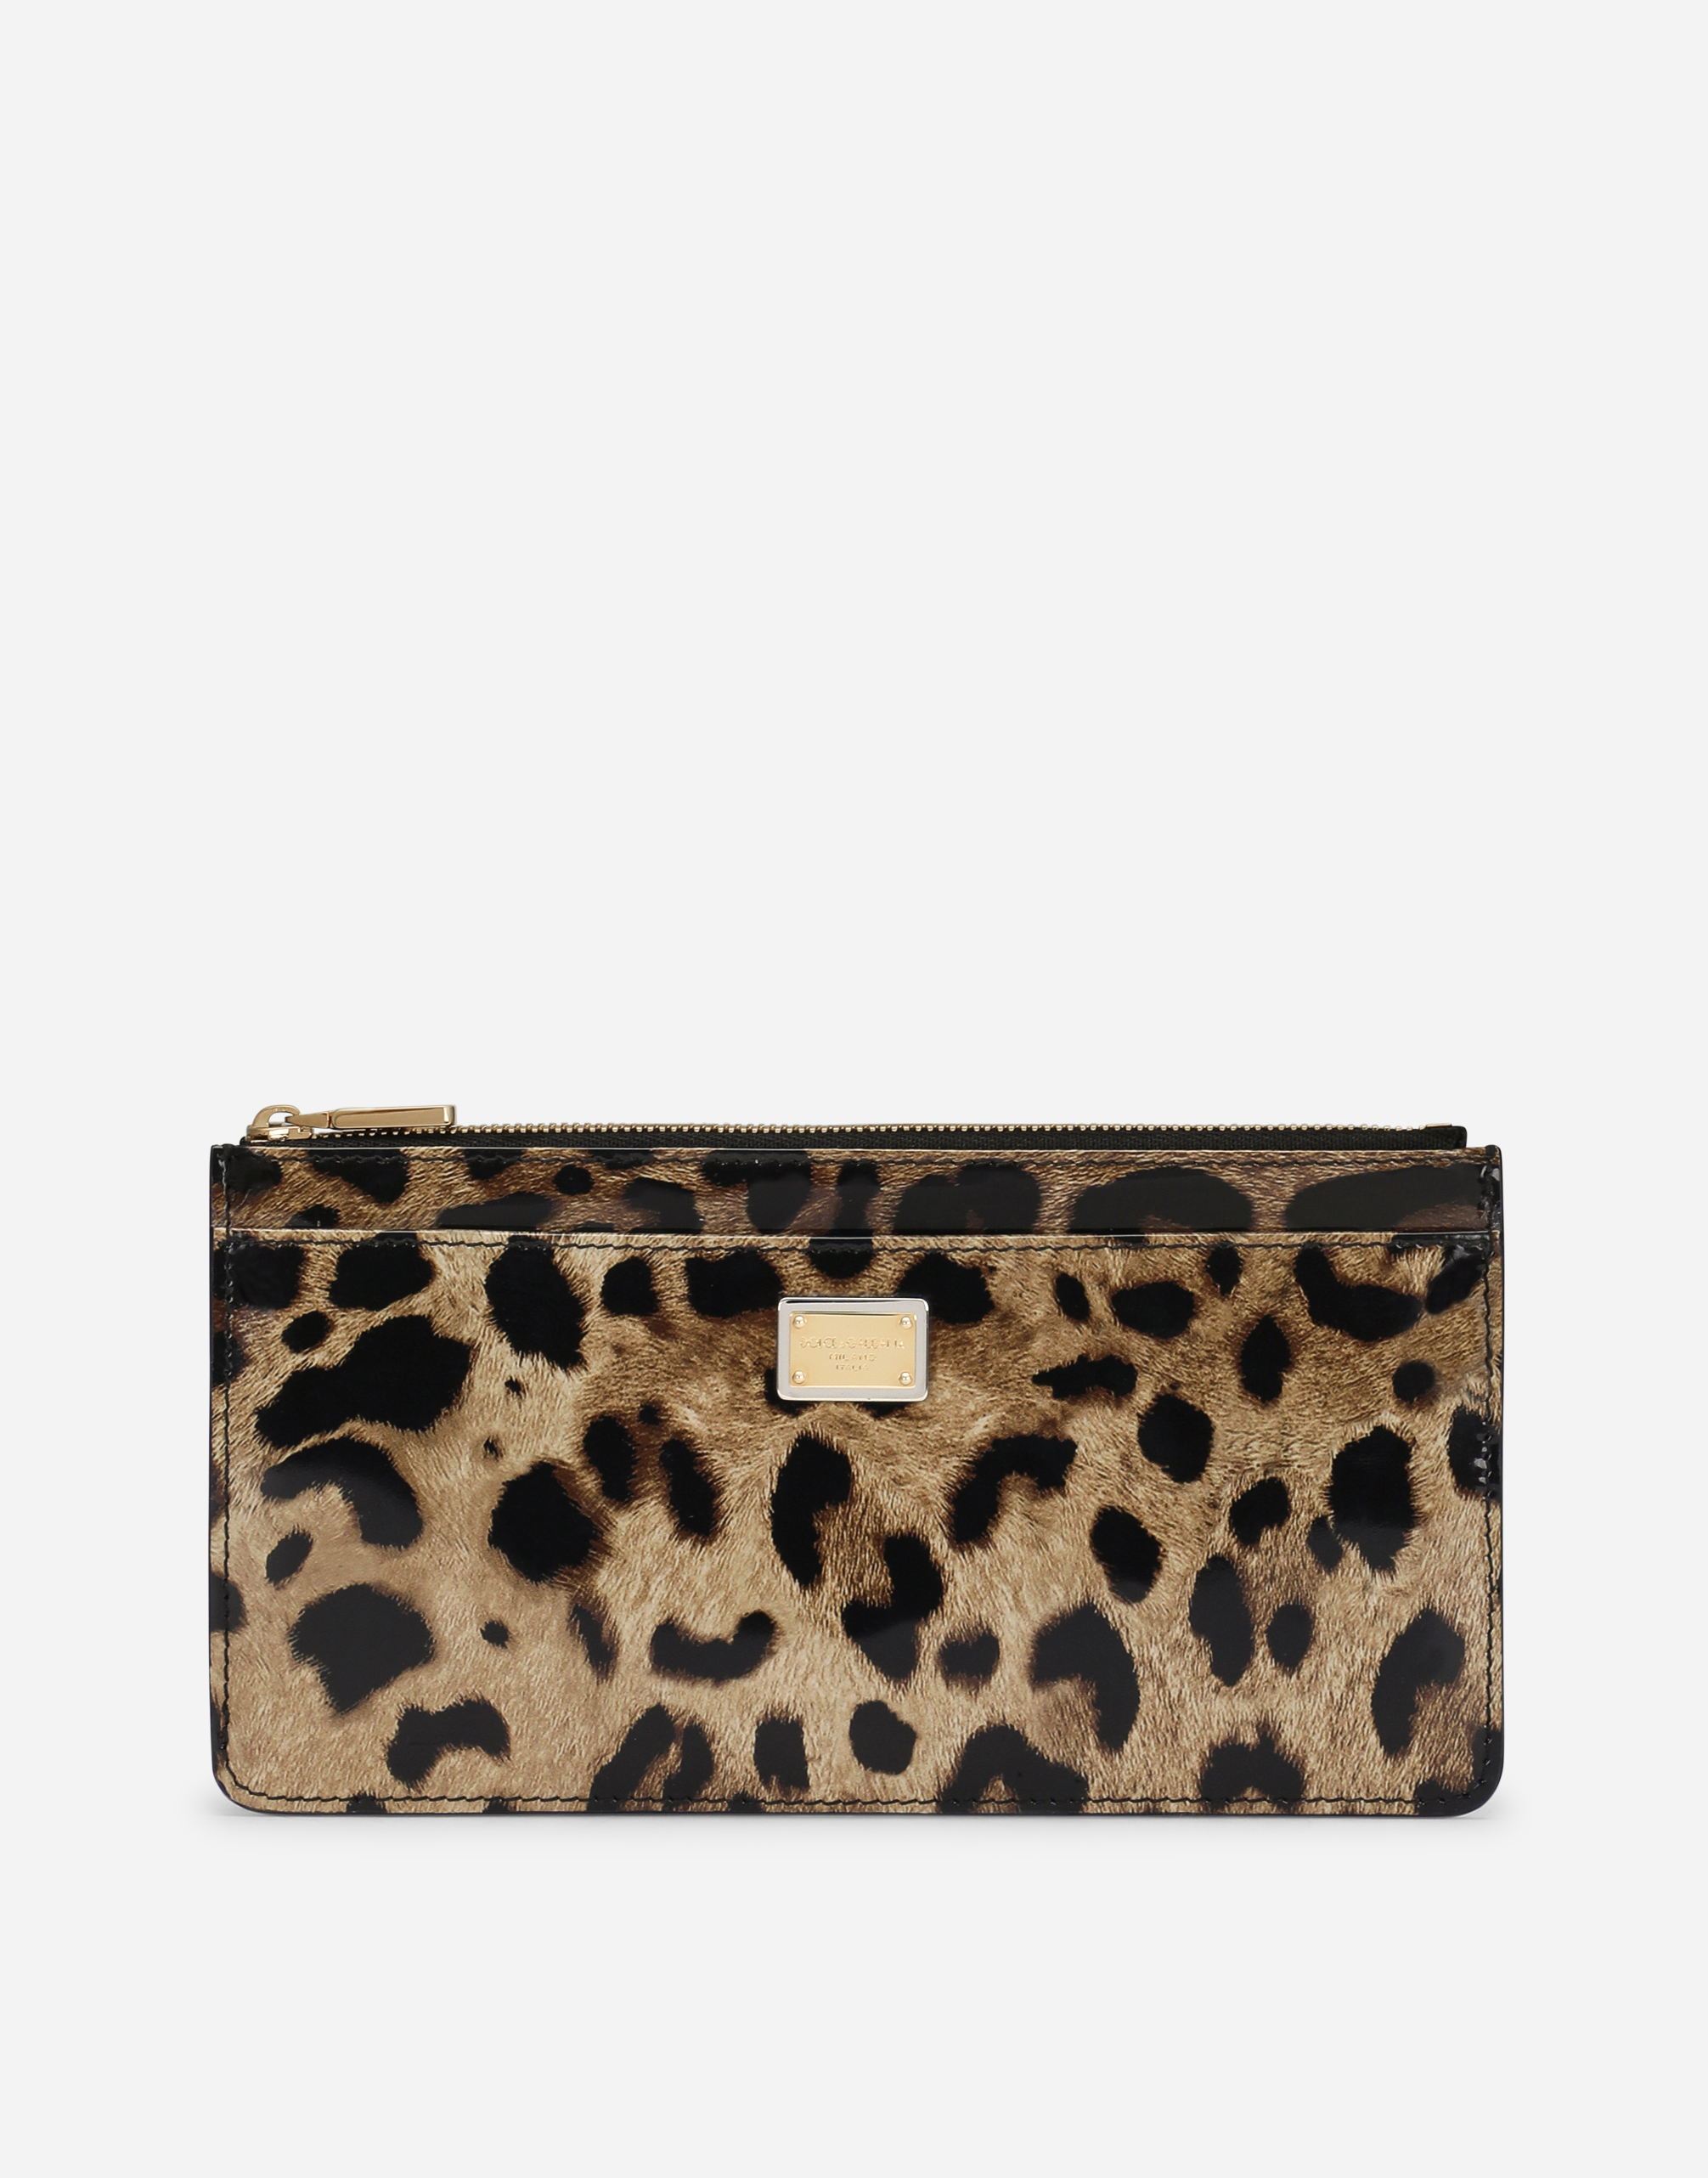 DOLCE & GABBANA LARGE POLISHED CALFSKIN CARD HOLDER WITH ZIPPER AND LEOPARD PRINT